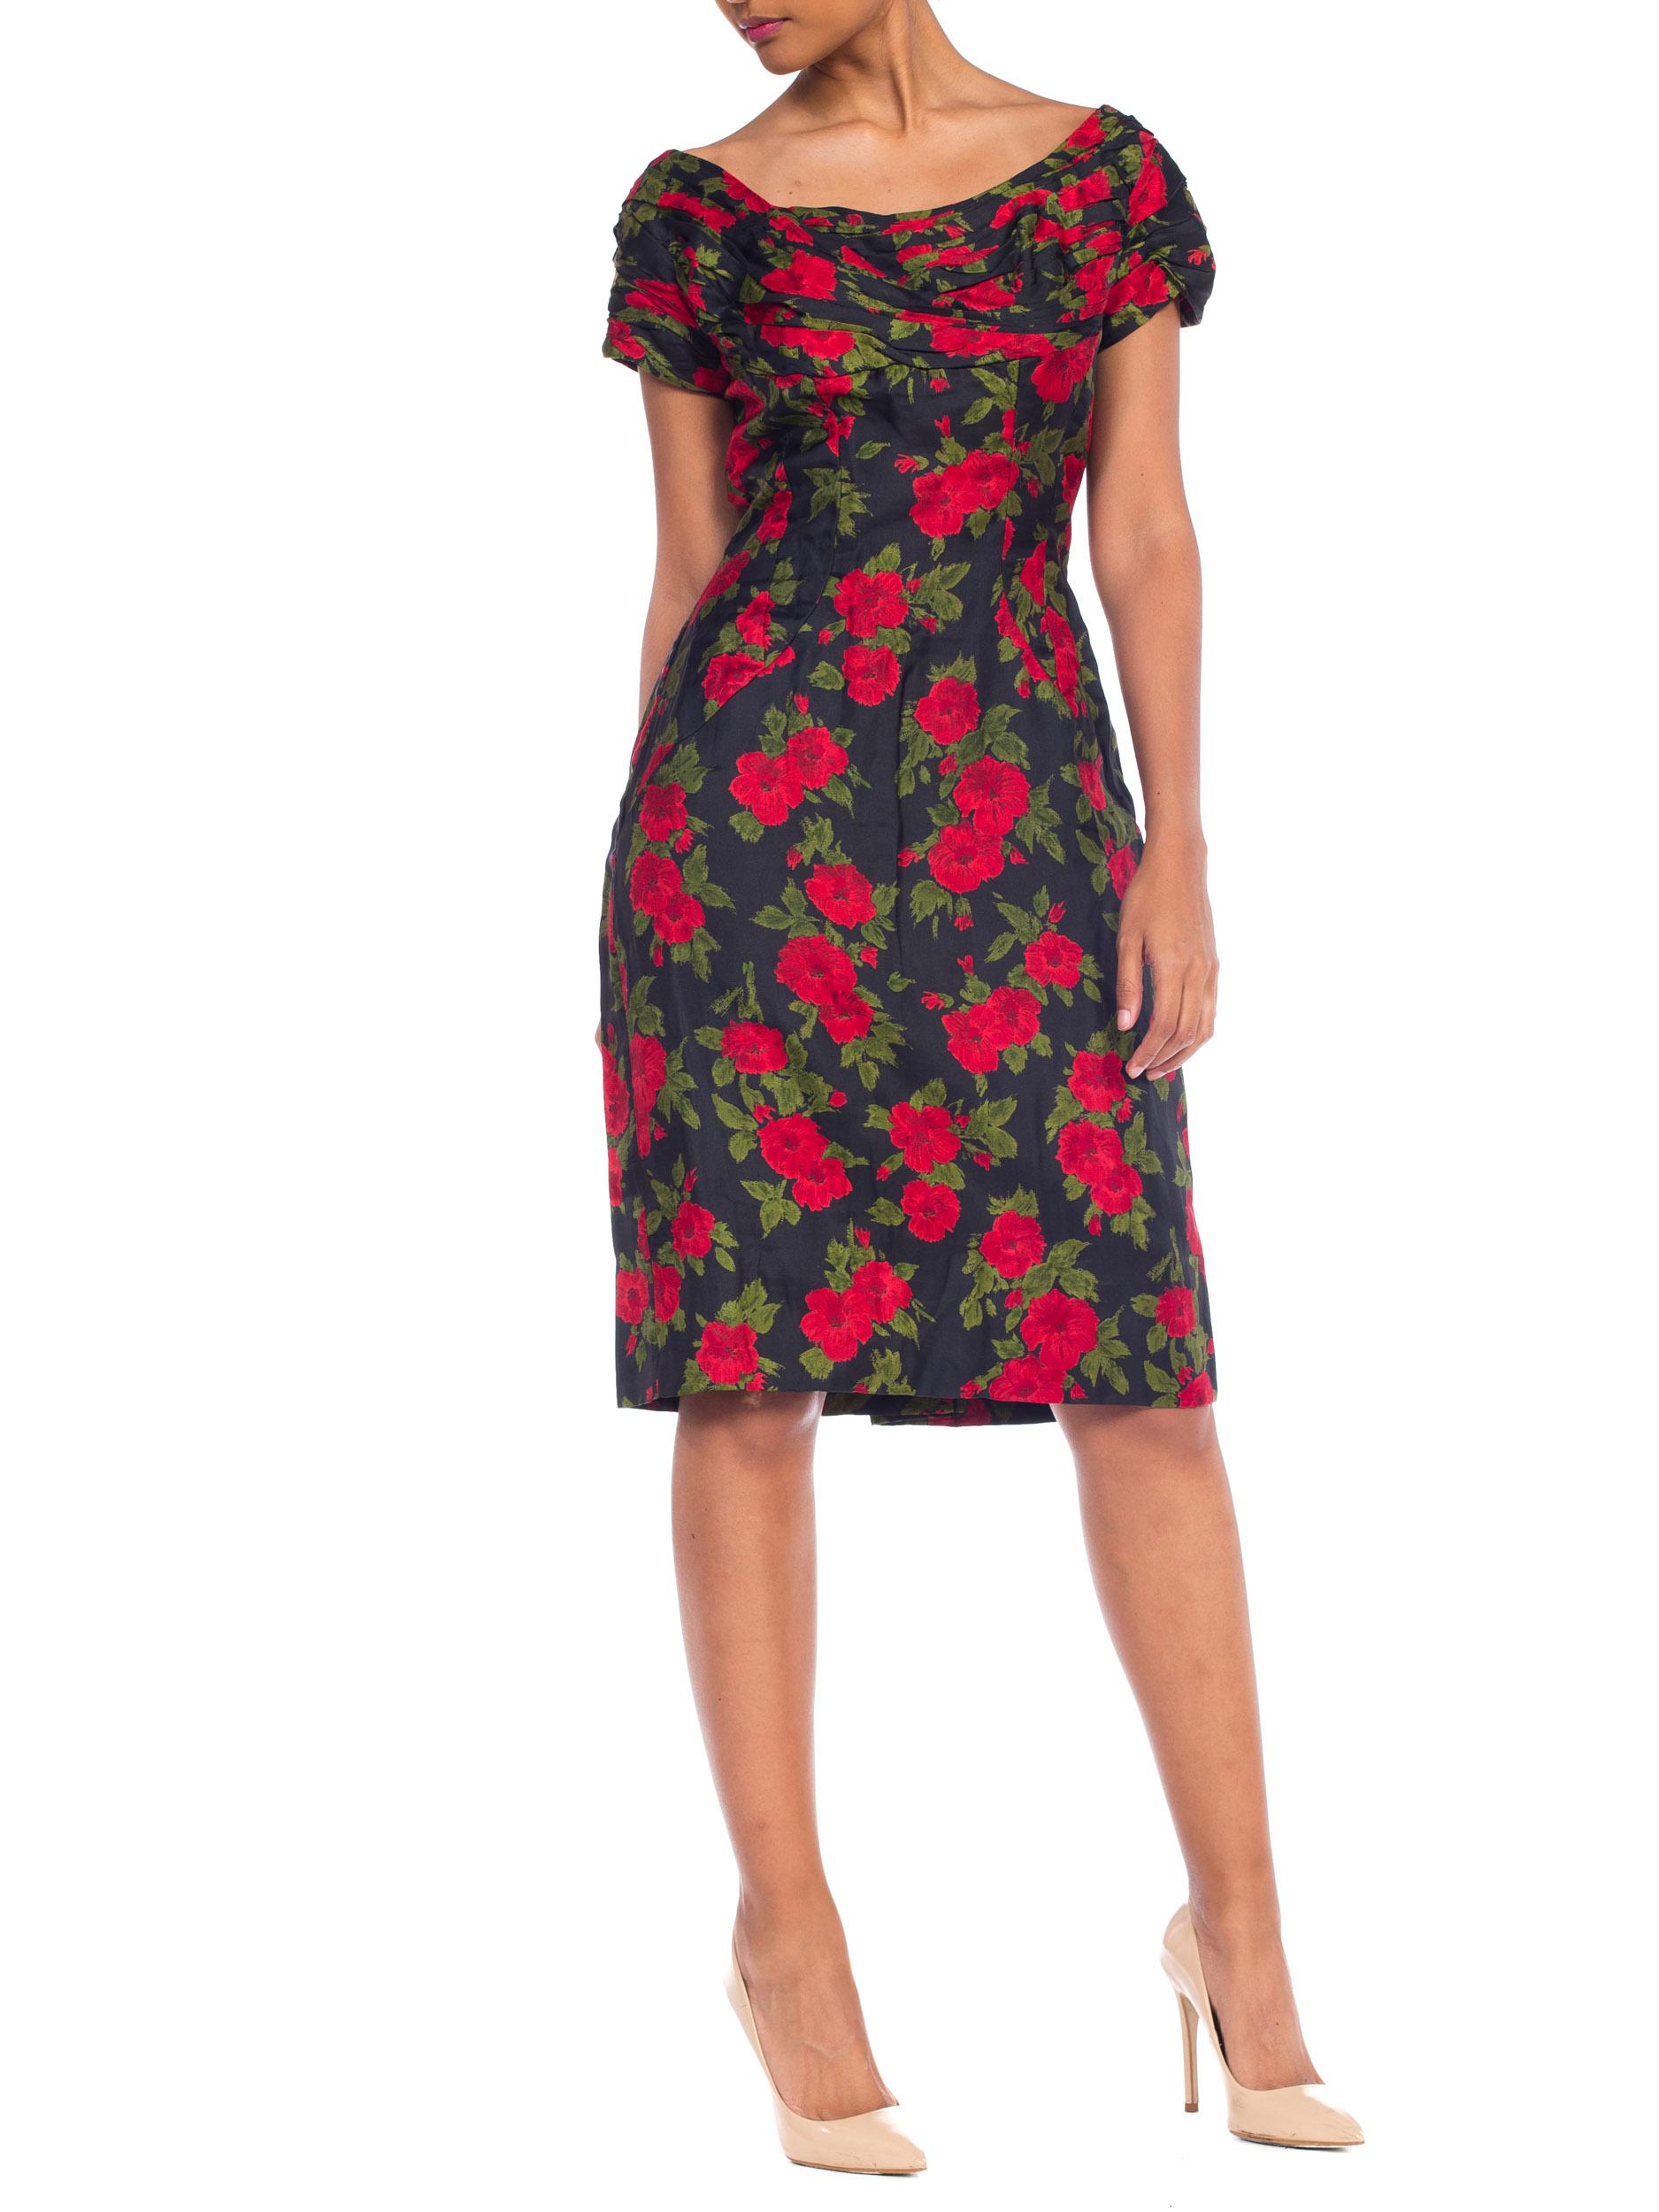 1950S DOLCE & GABBANA Style Silk Twill Red Black Classic Rose Floral Printed Dr In Excellent Condition For Sale In New York, NY